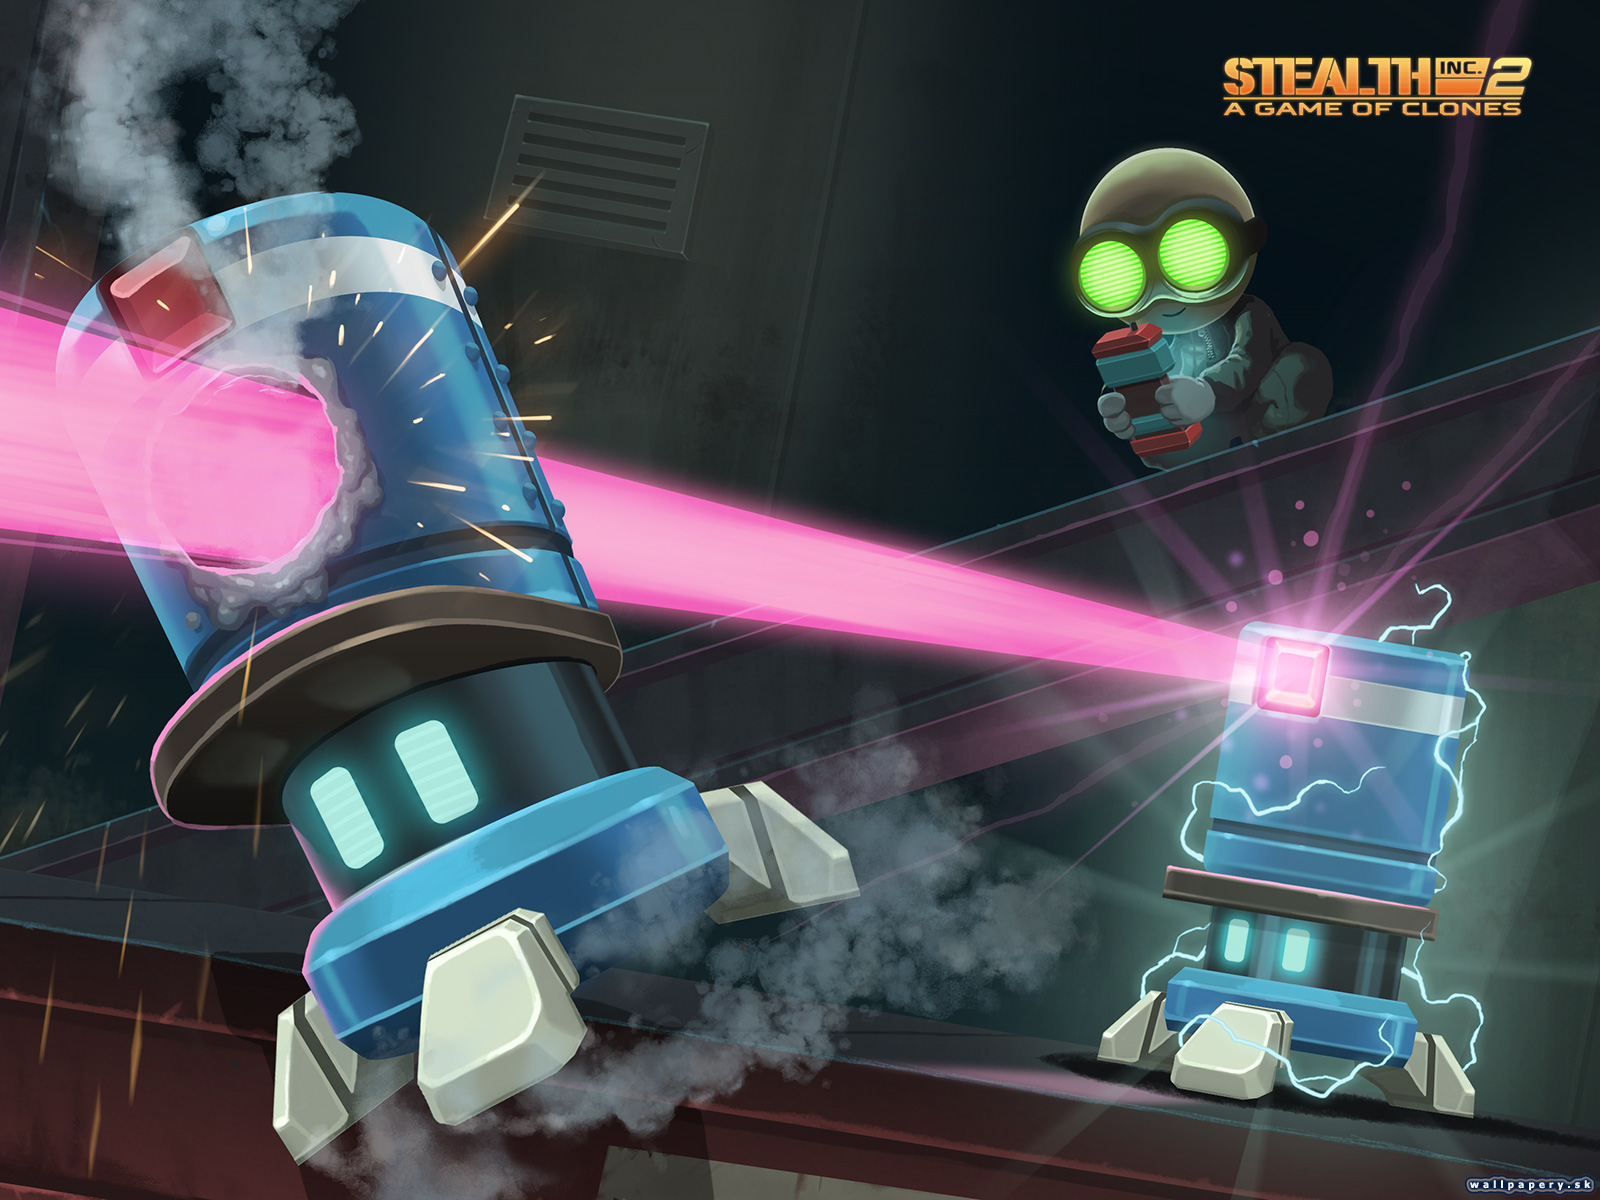 Stealth Inc 2: A Game of Clones - wallpaper 4